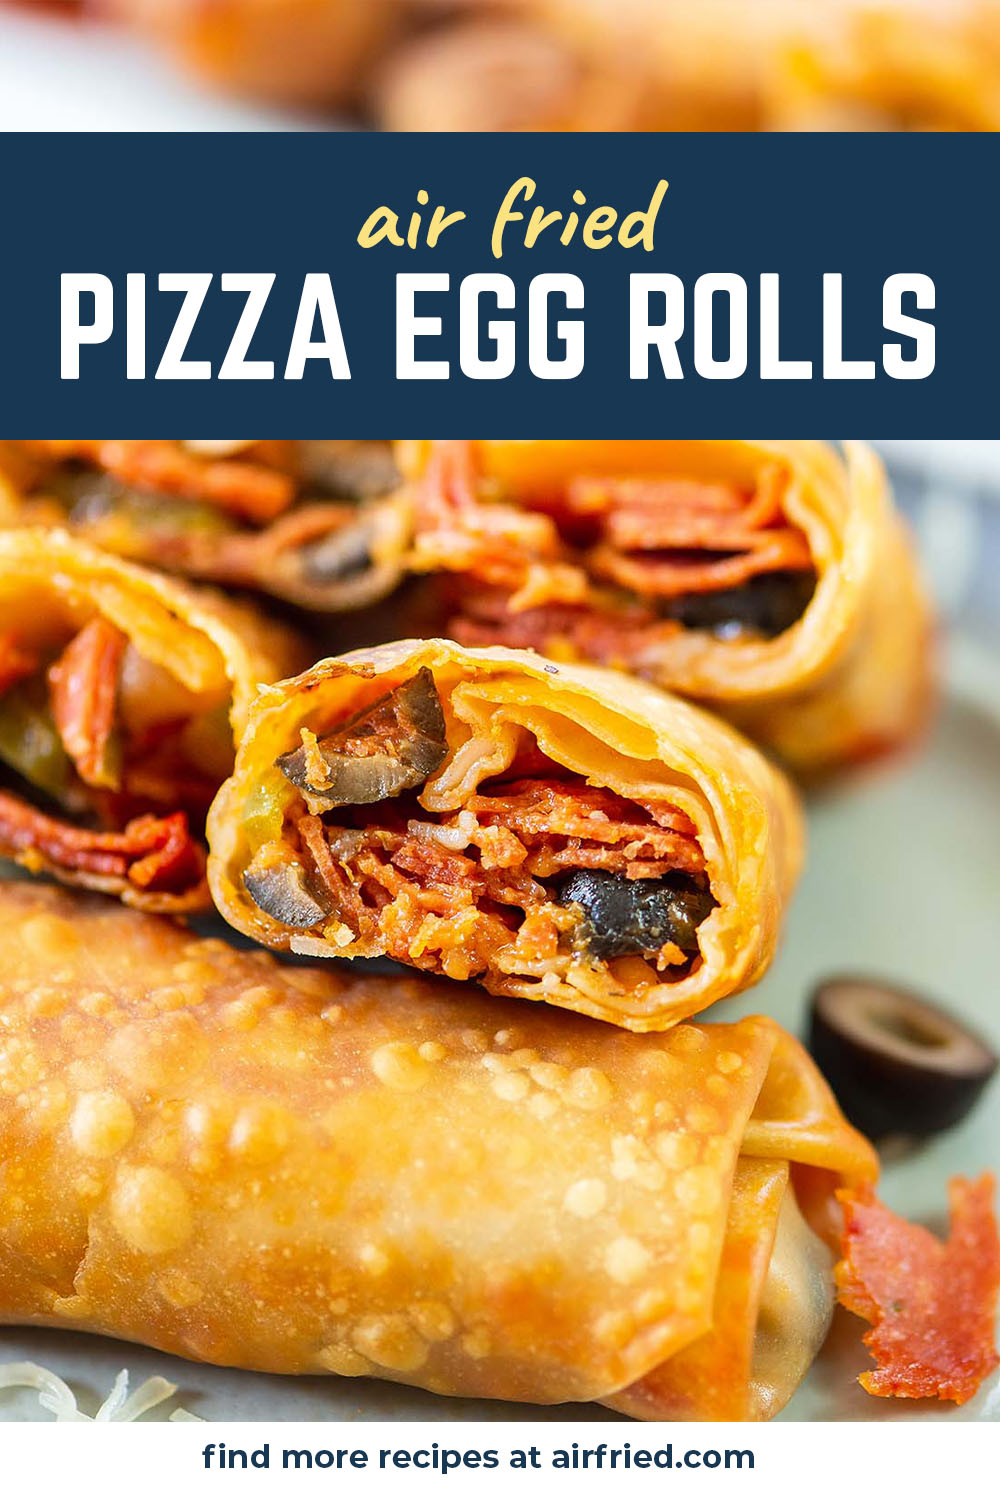 Our pizza egg rolls are super easy to make and they cook perfectly in the air fryer!